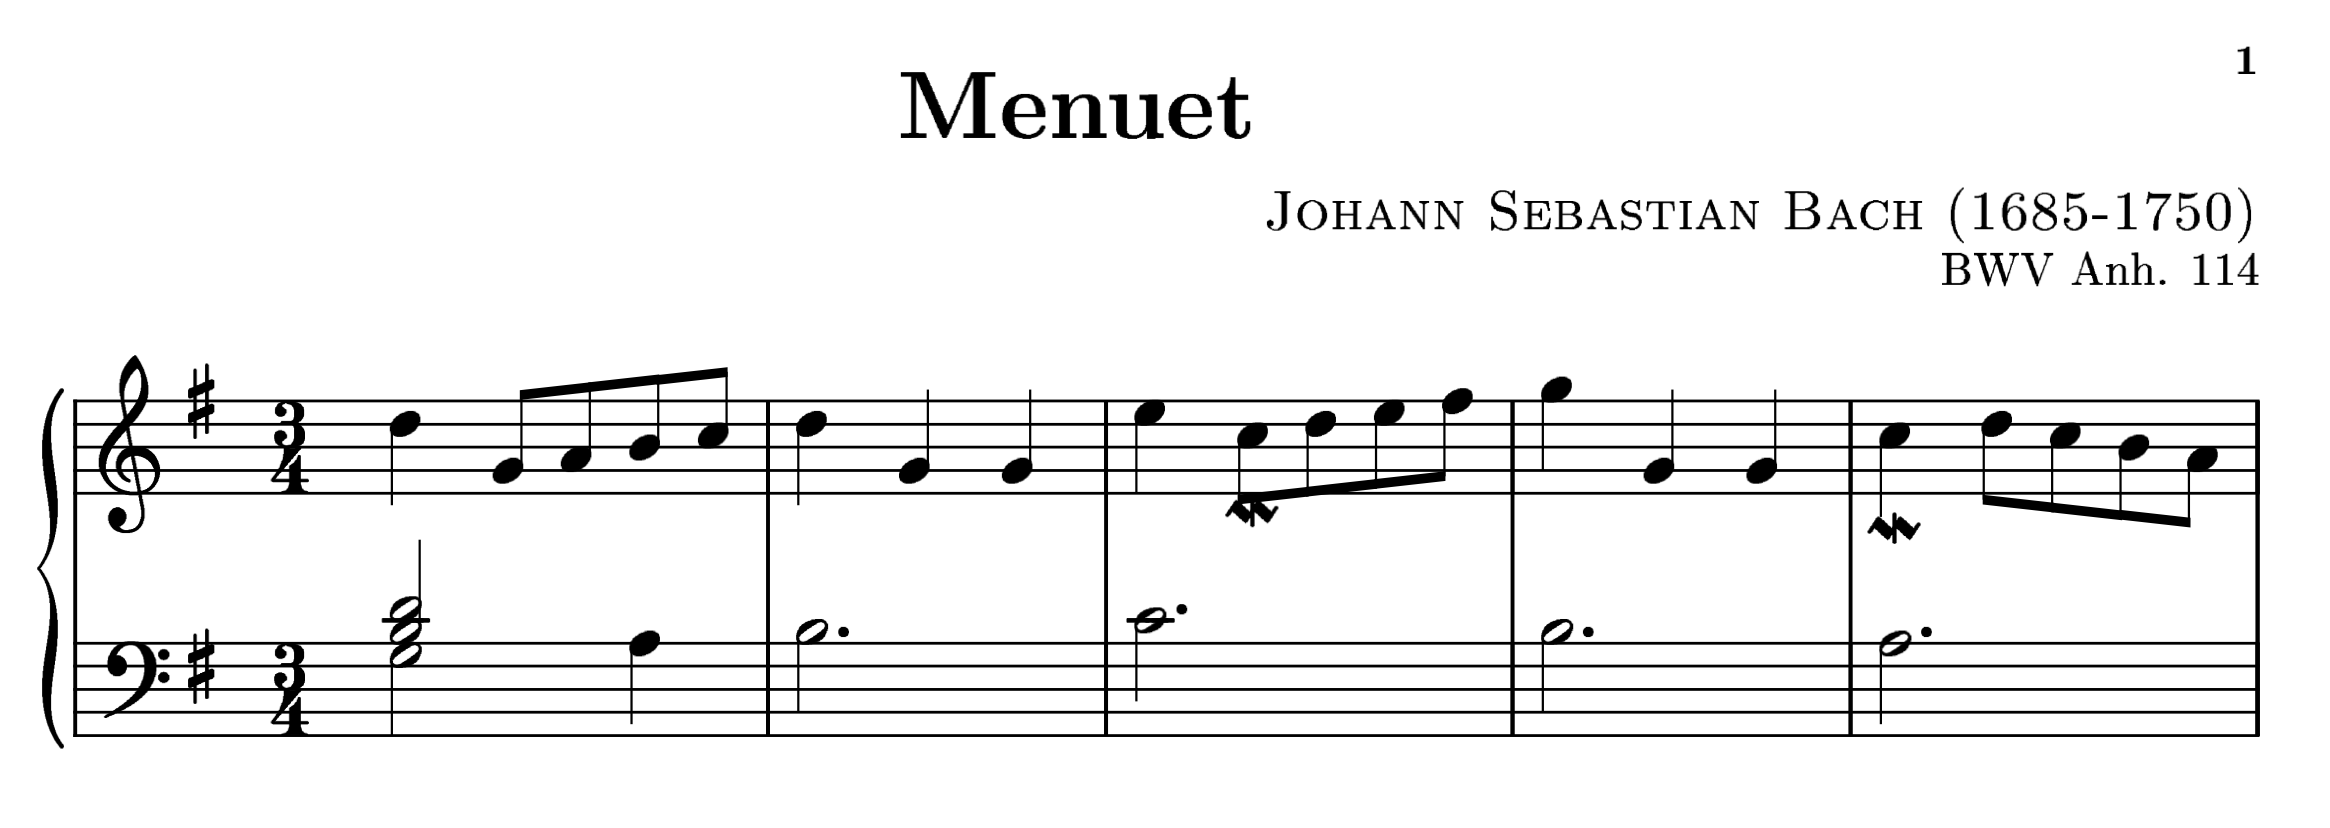 BWV Anh.114.png